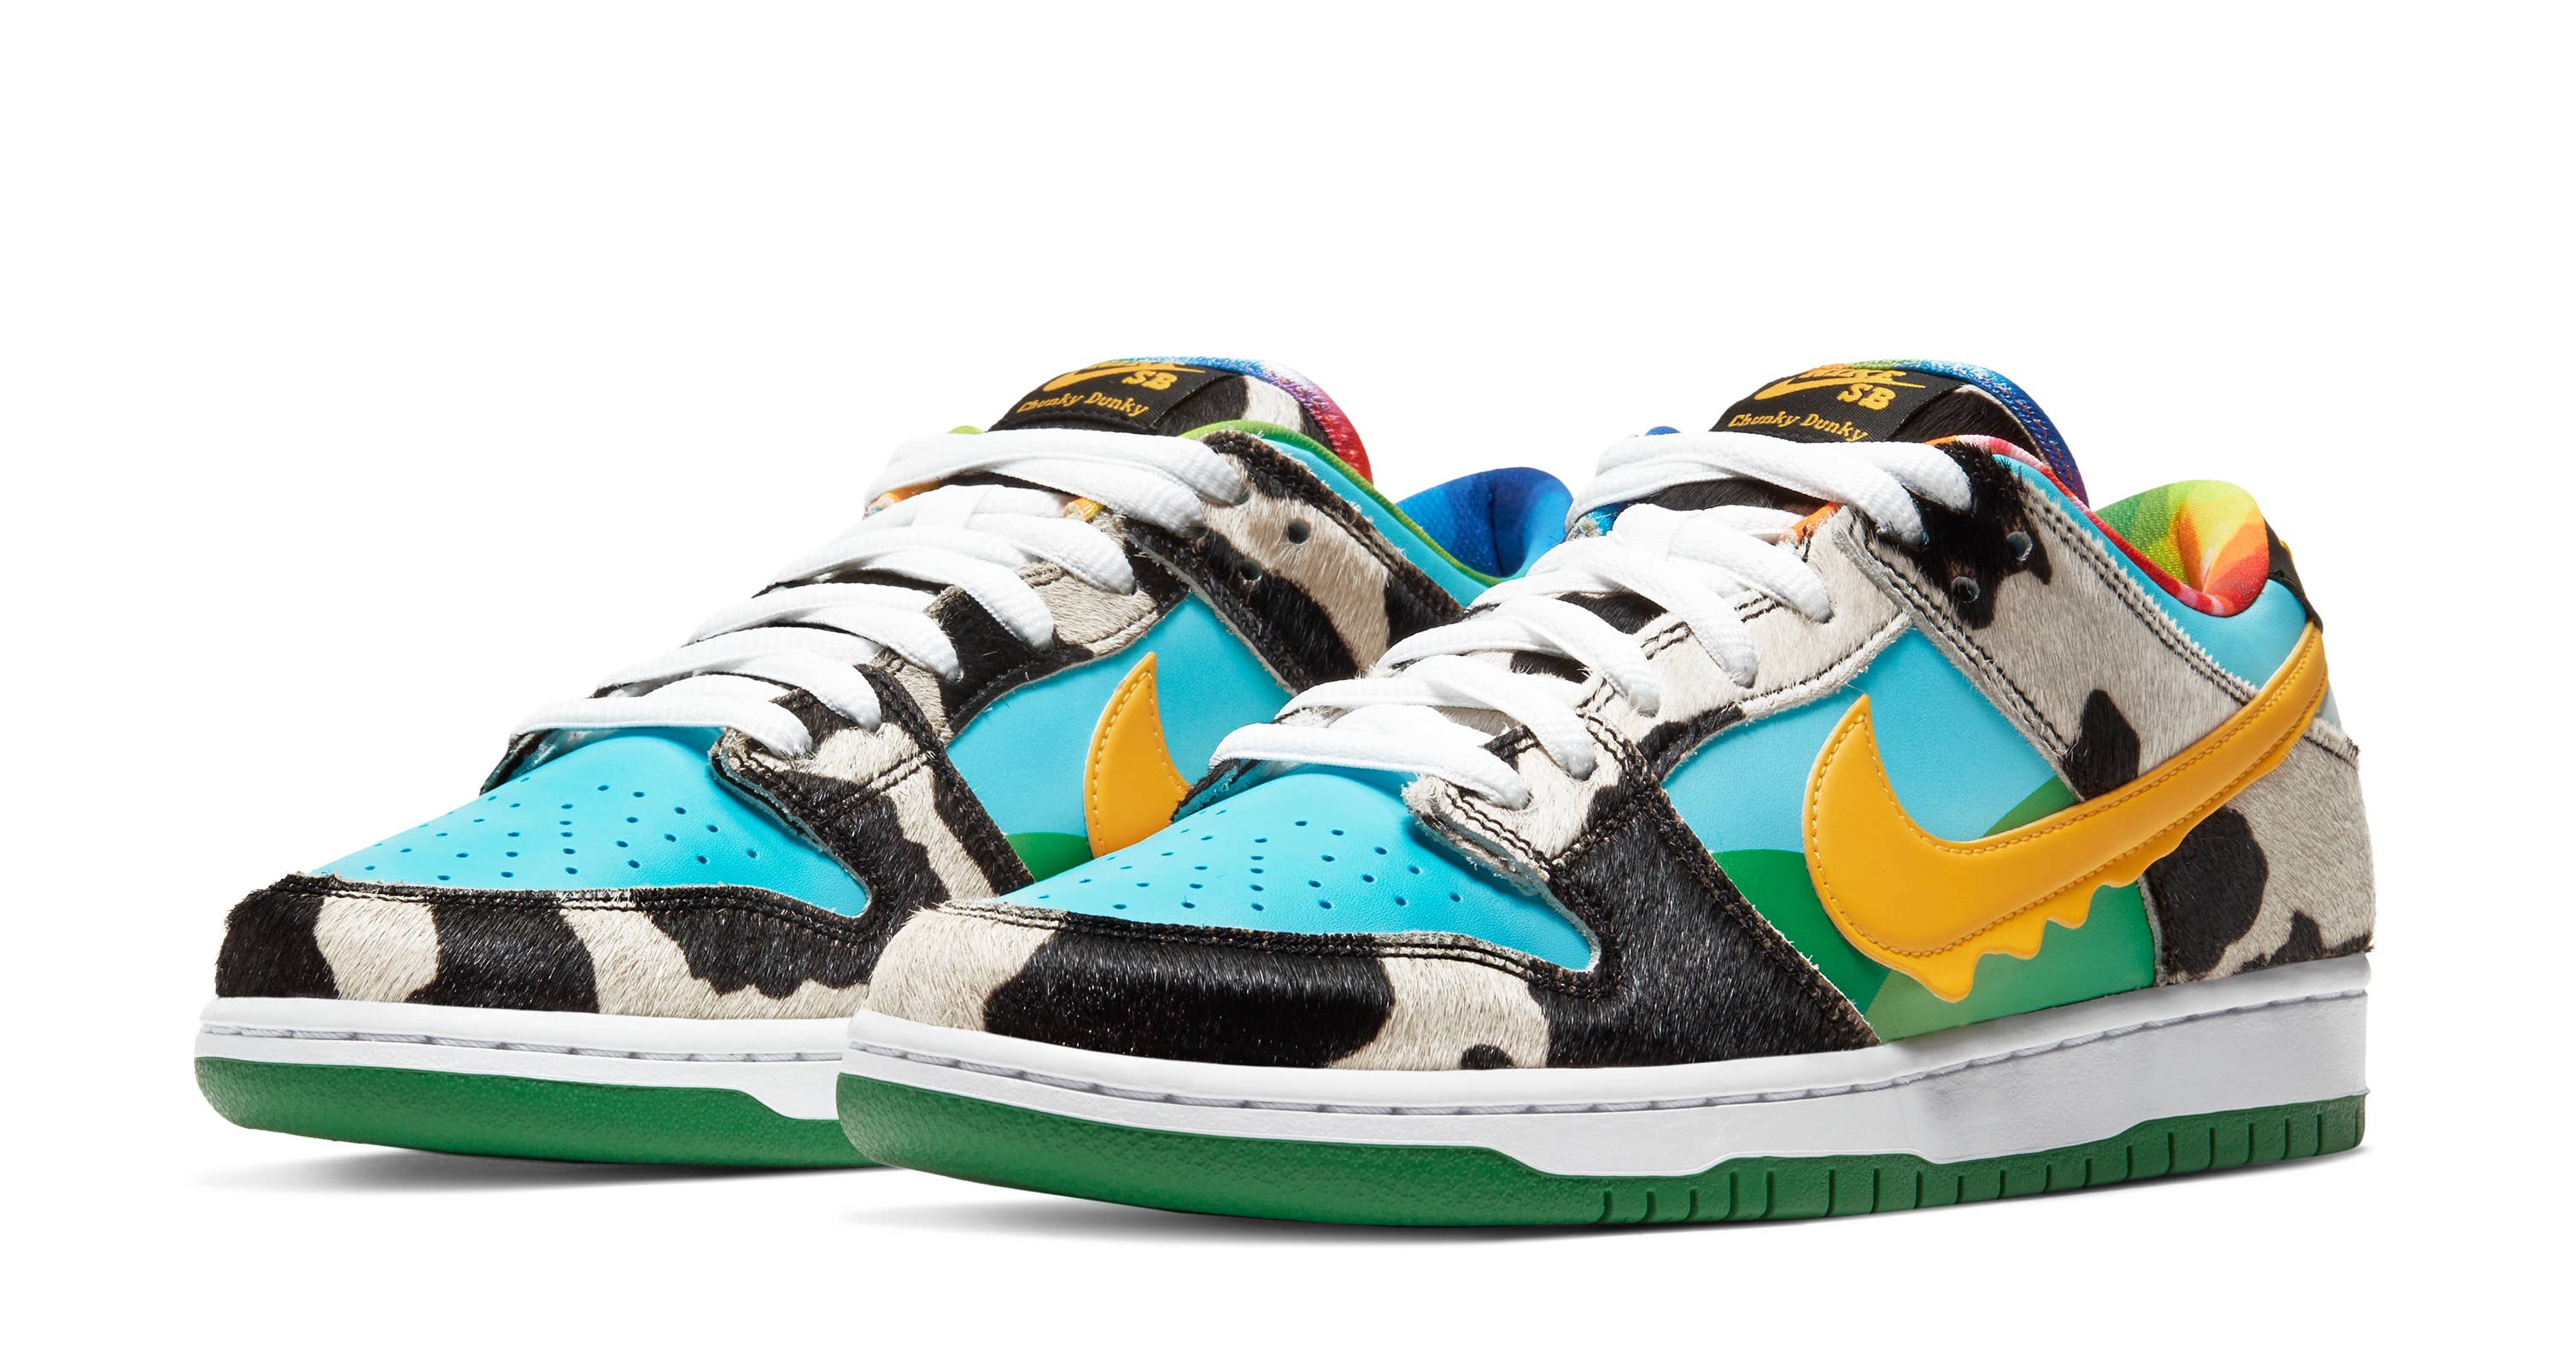 Ben and Jerry's x Nike SB Dunk Low 'Chunky Dunky' CU3244 100 (Pair)